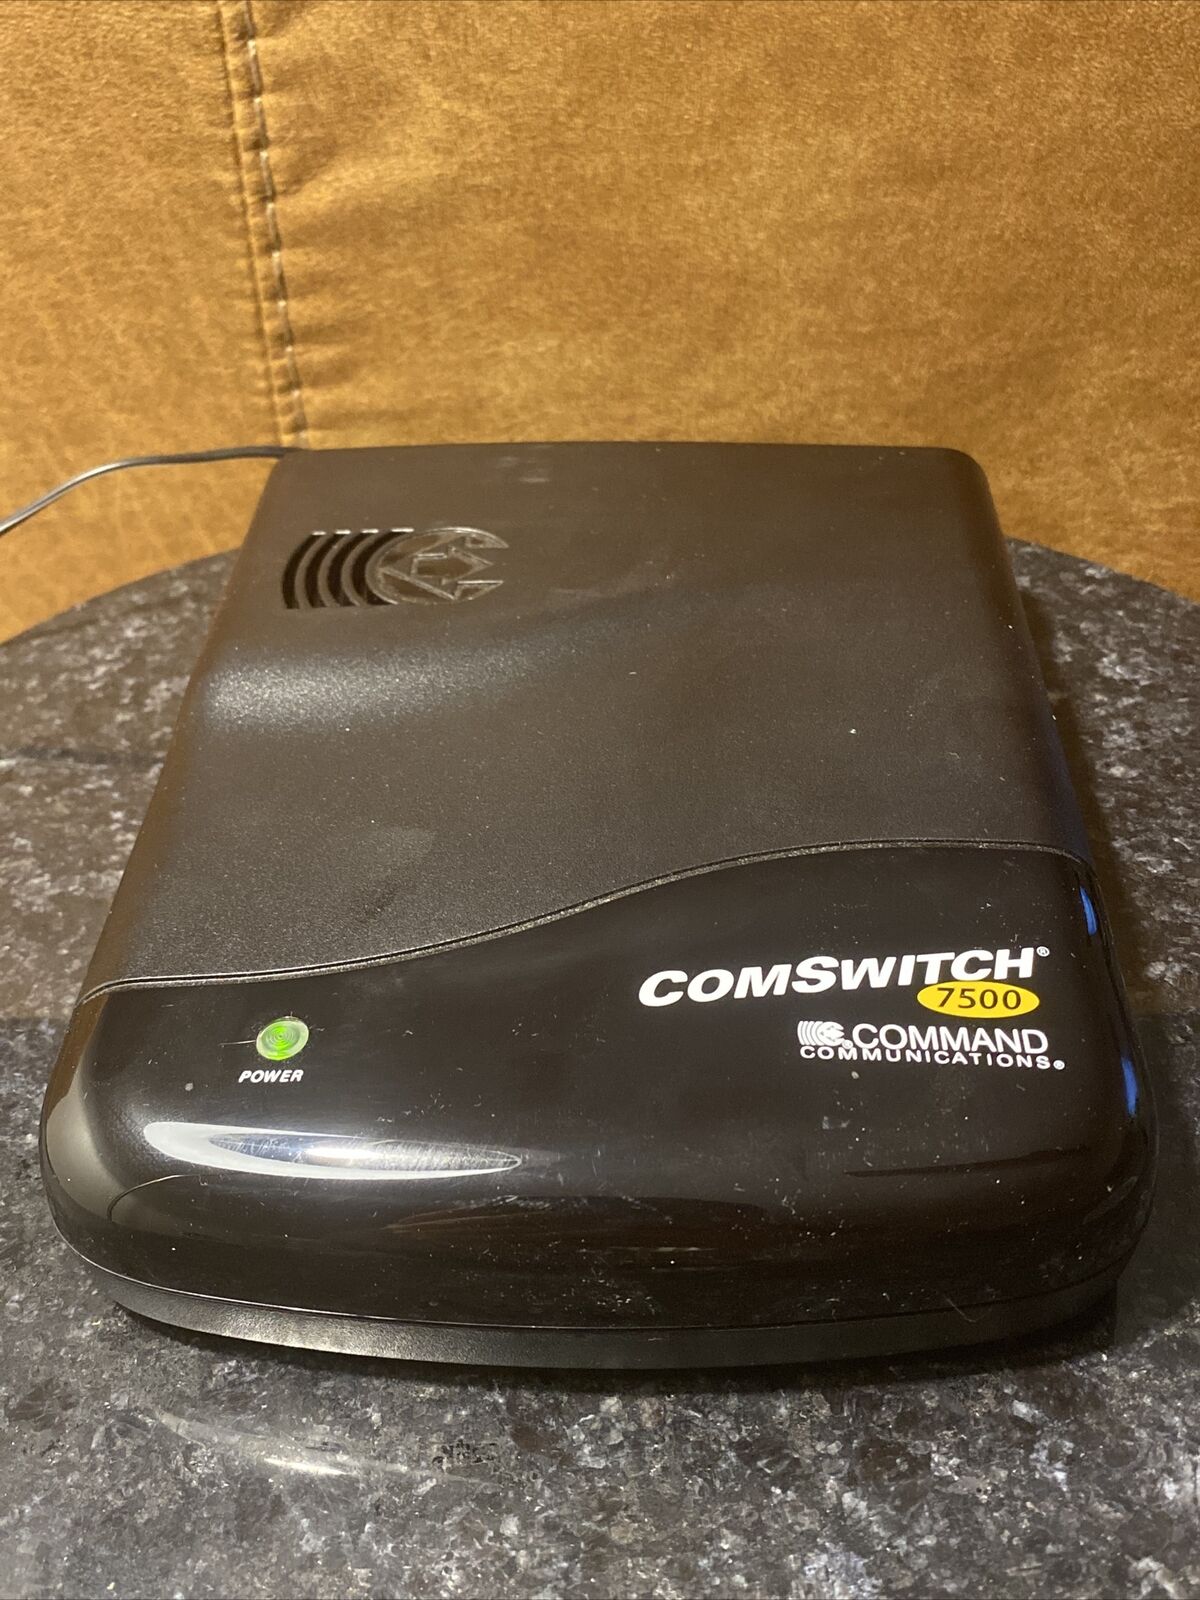 COMMAND COMSWITCH 7500 PHONE COMPUTER MANAGEMENT 4 Ports Multi line POWERS UP